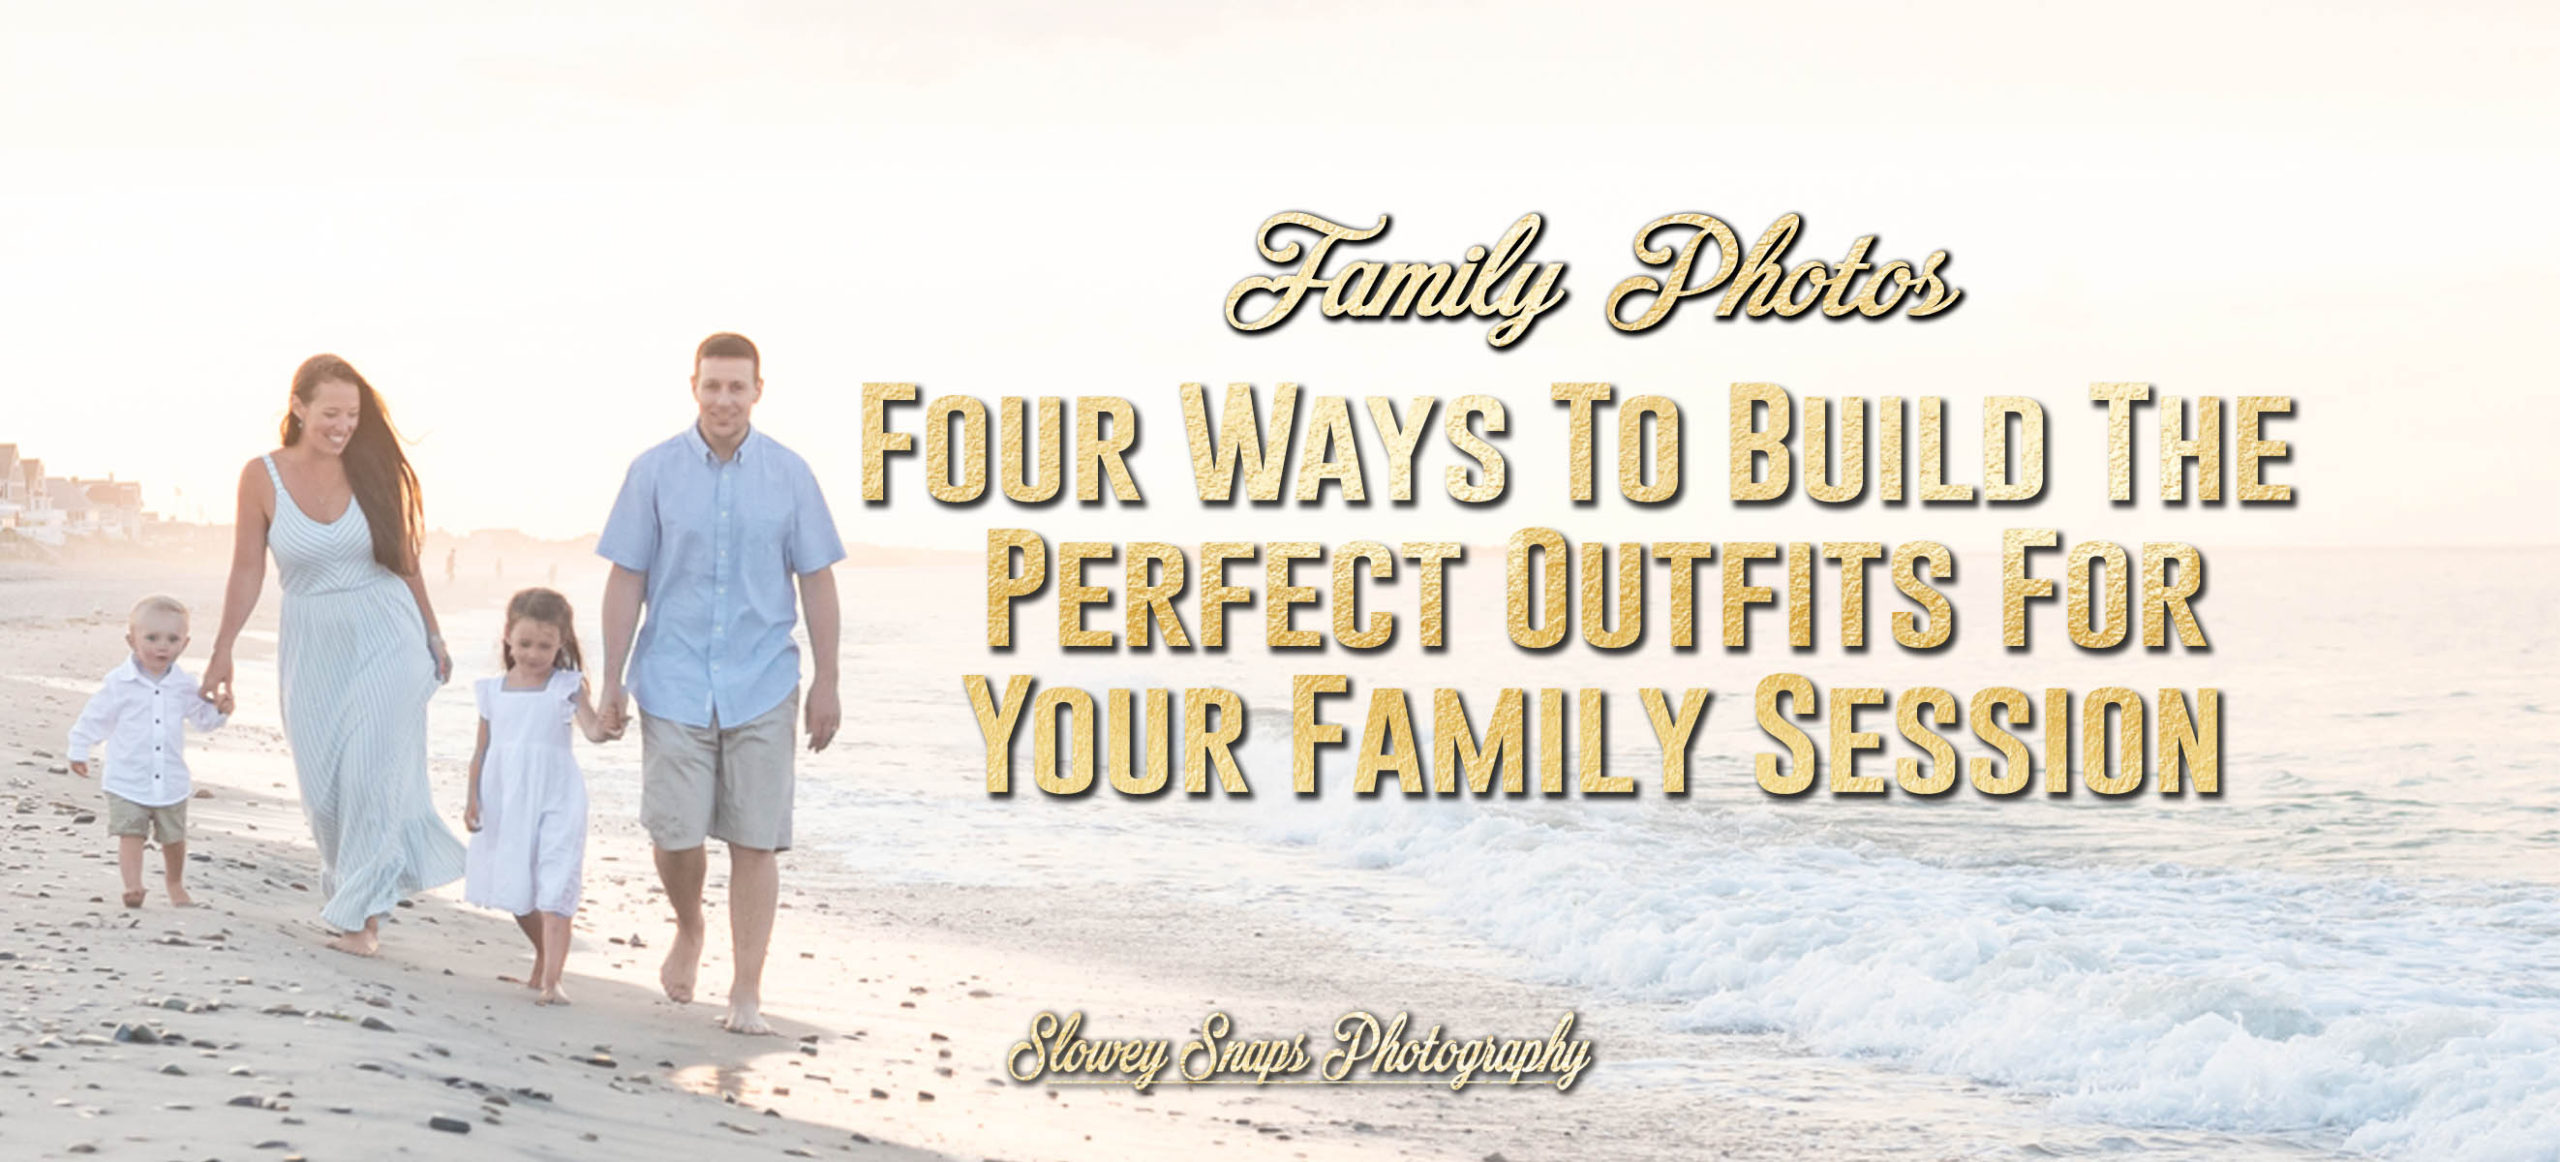 What To Wear for your family photography session